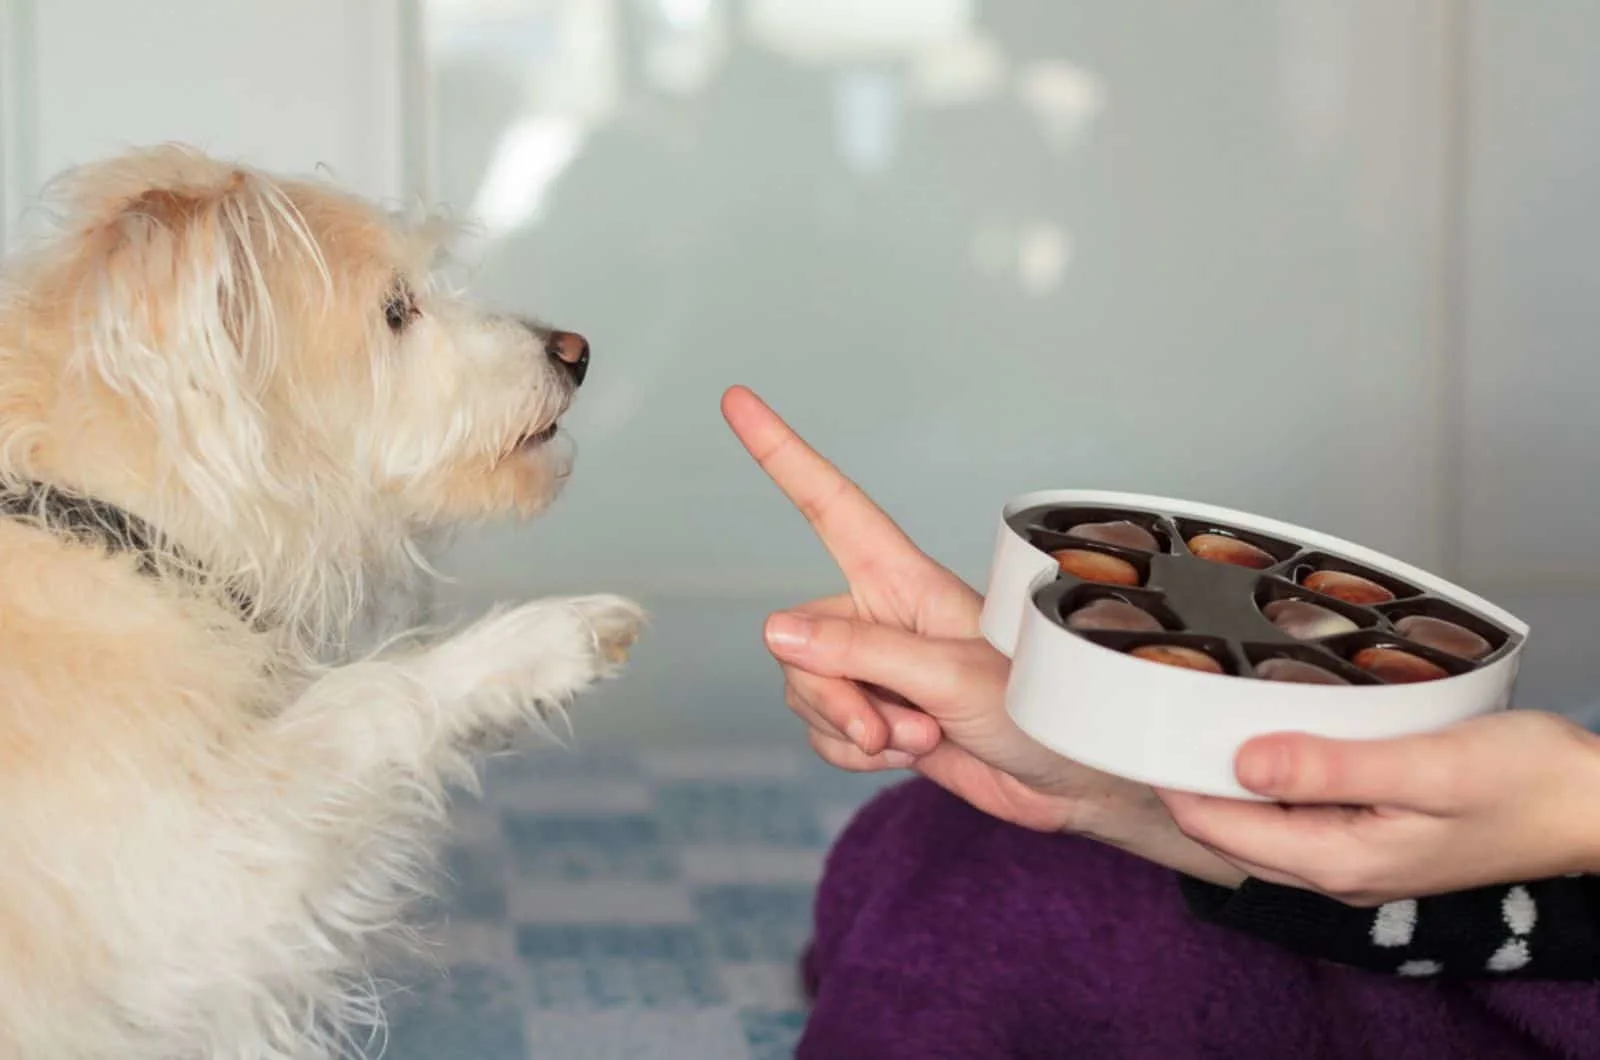 dog giving paw asking for chocolate from woman's hand